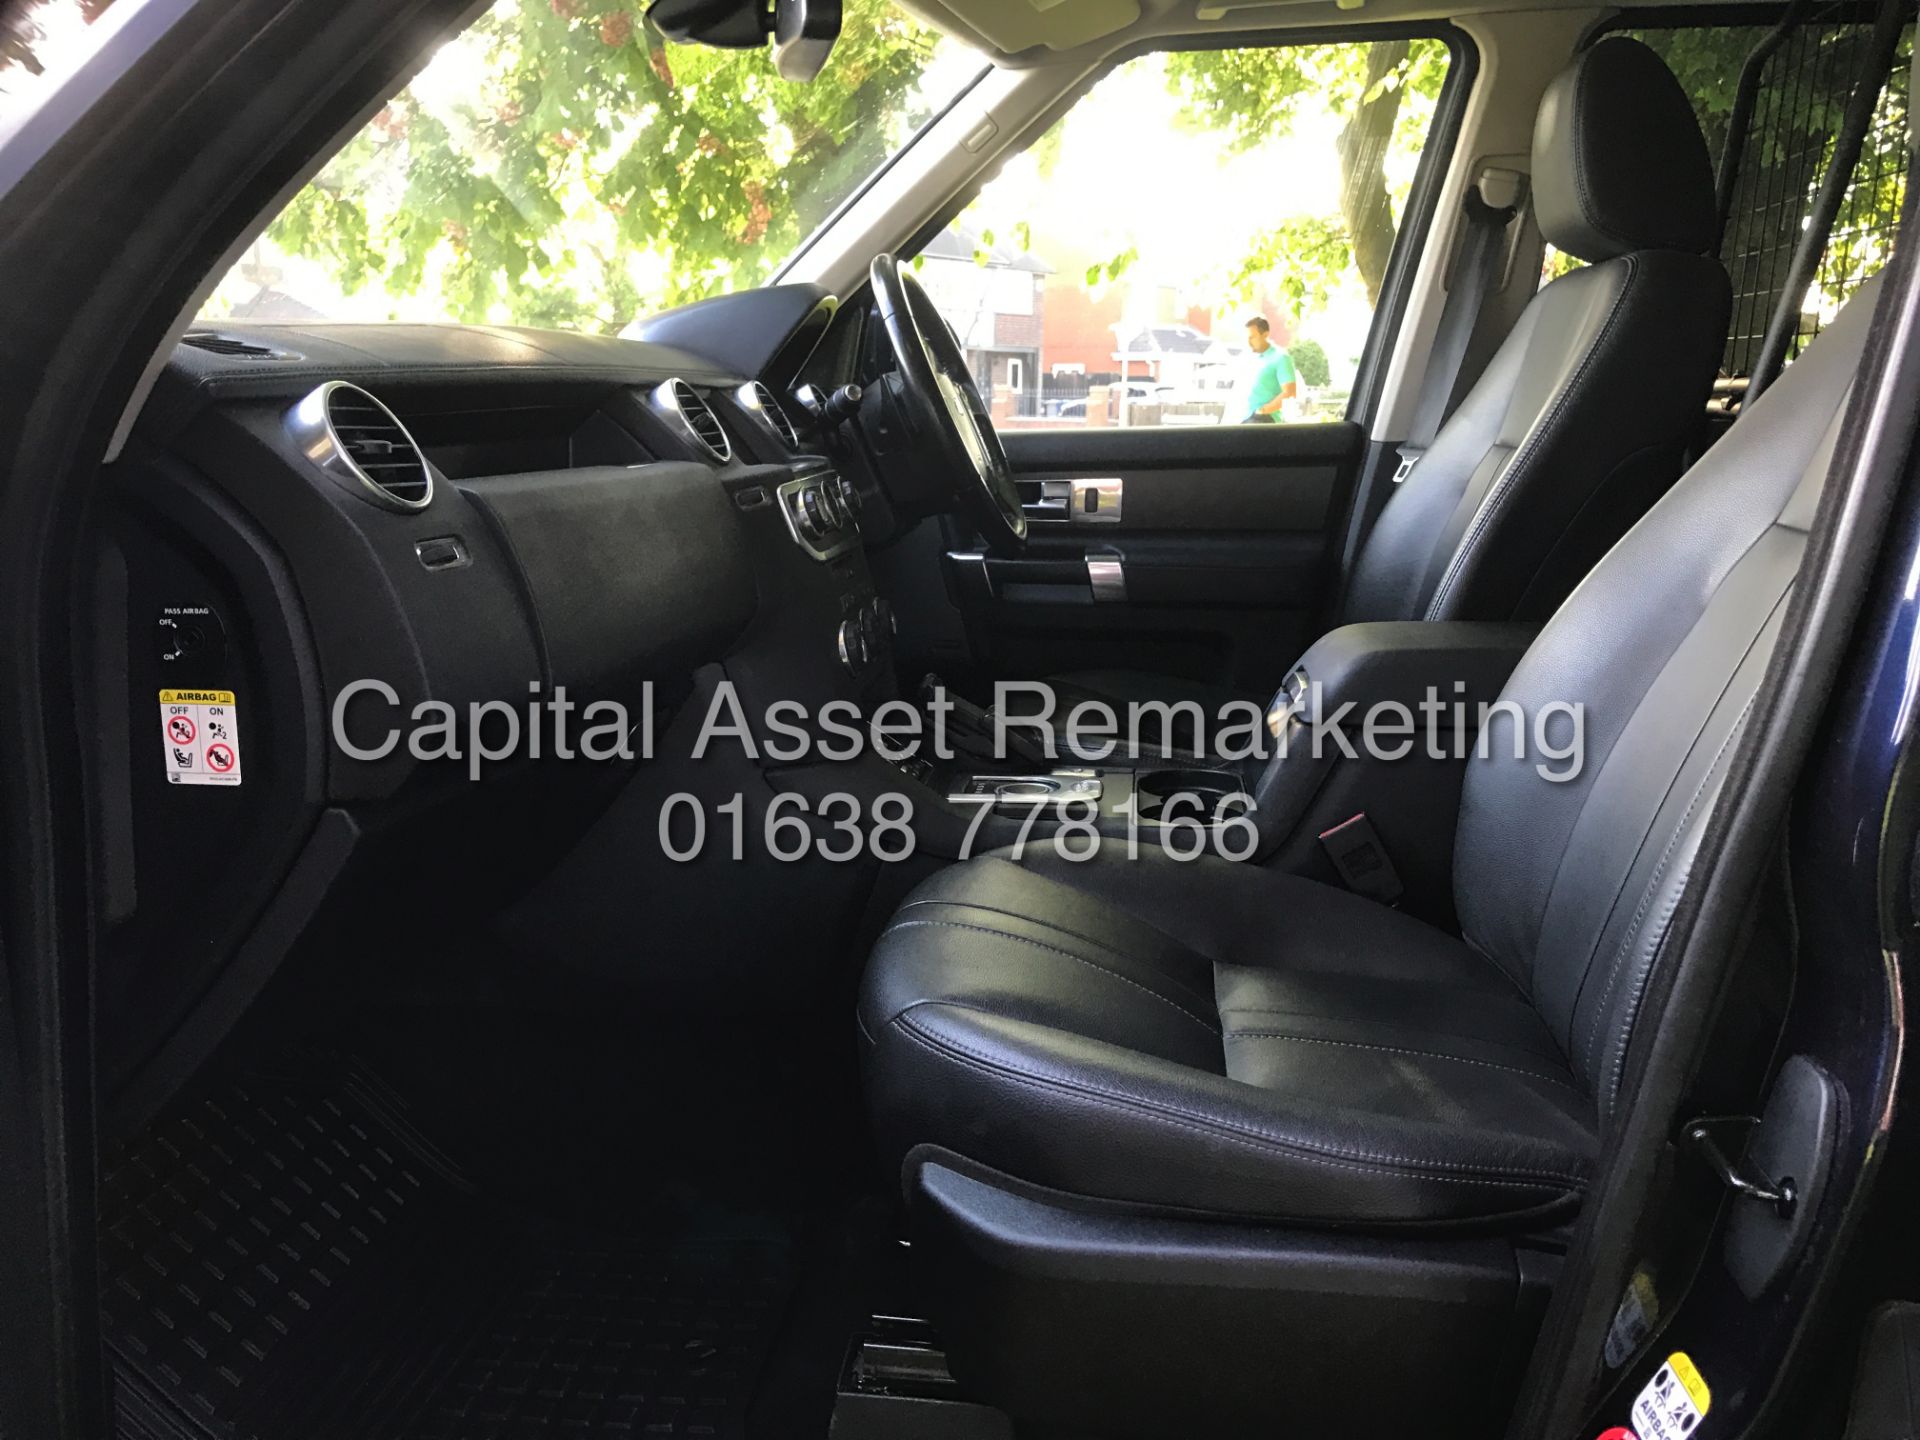 (On Sale) LAND ROVER DISCOVERY 4 'XS EDITION' *COMMERCIAL* (2015) '3.0 SDV6 - AUTO-LEATHER-SAT NAV' - Image 19 of 32